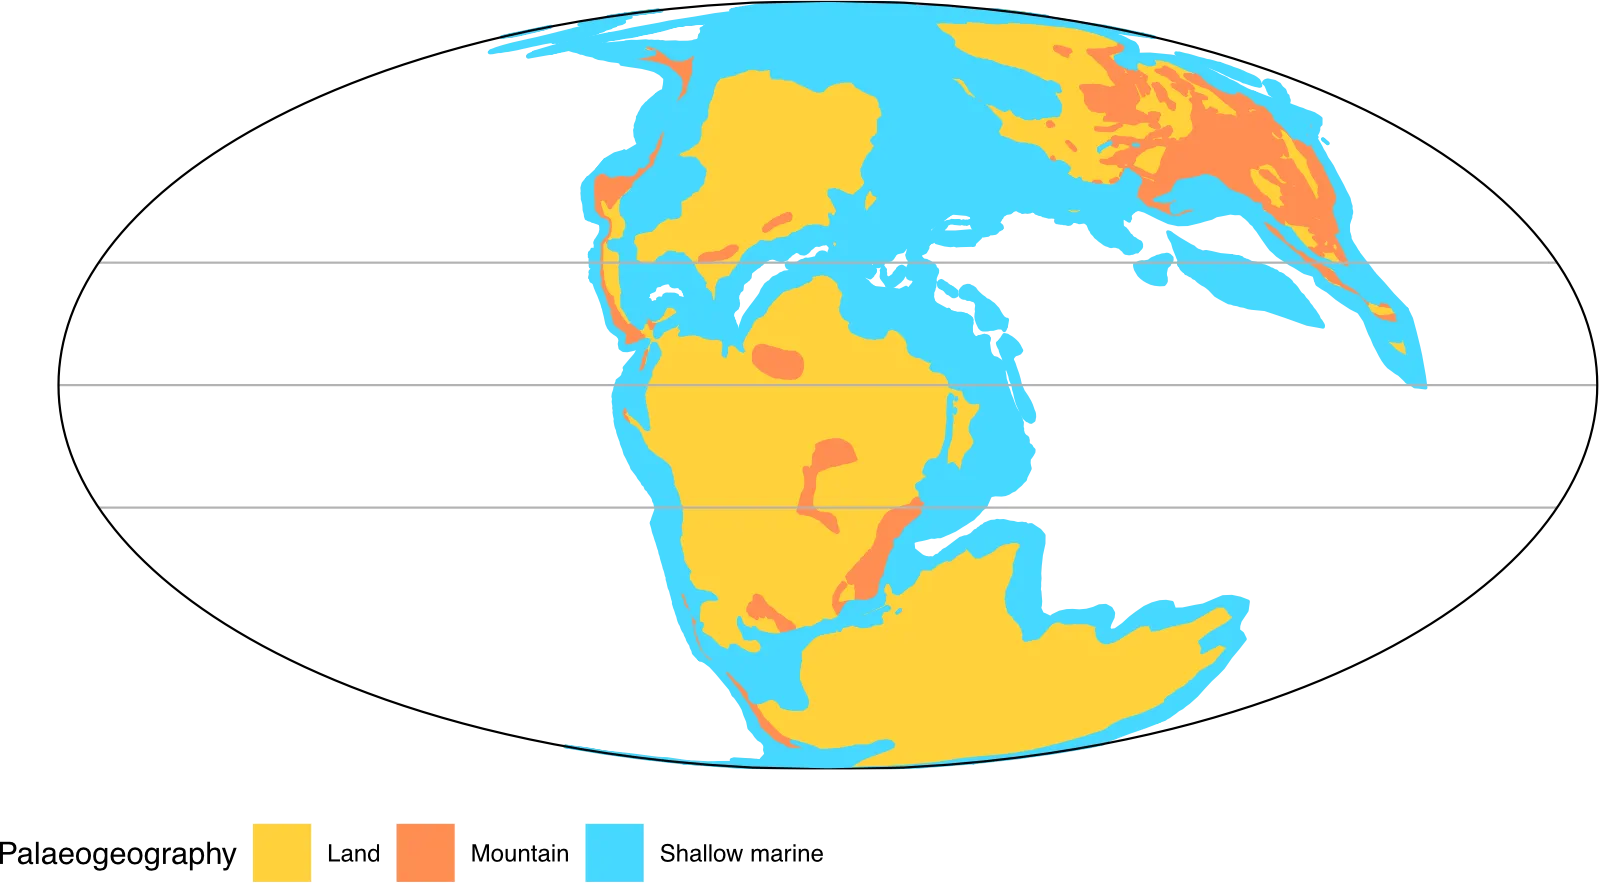 Palaeogeographical map of the Late Jurassic